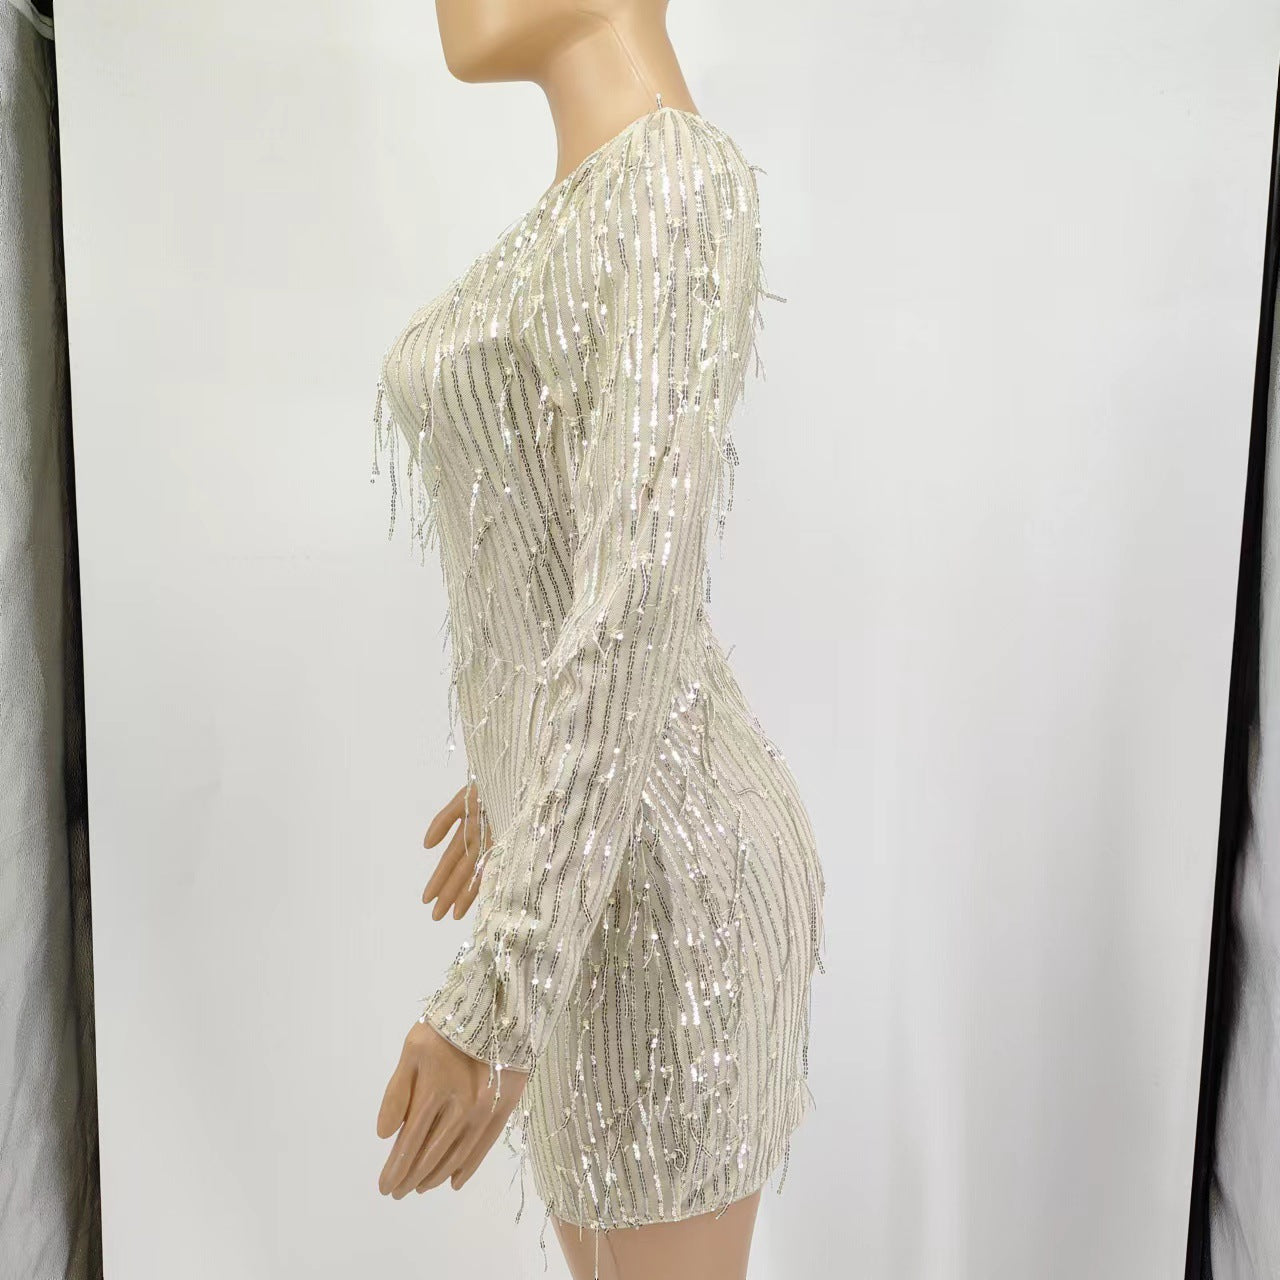 Sexy One Shoulder Sequined Sheath Mini Dresses